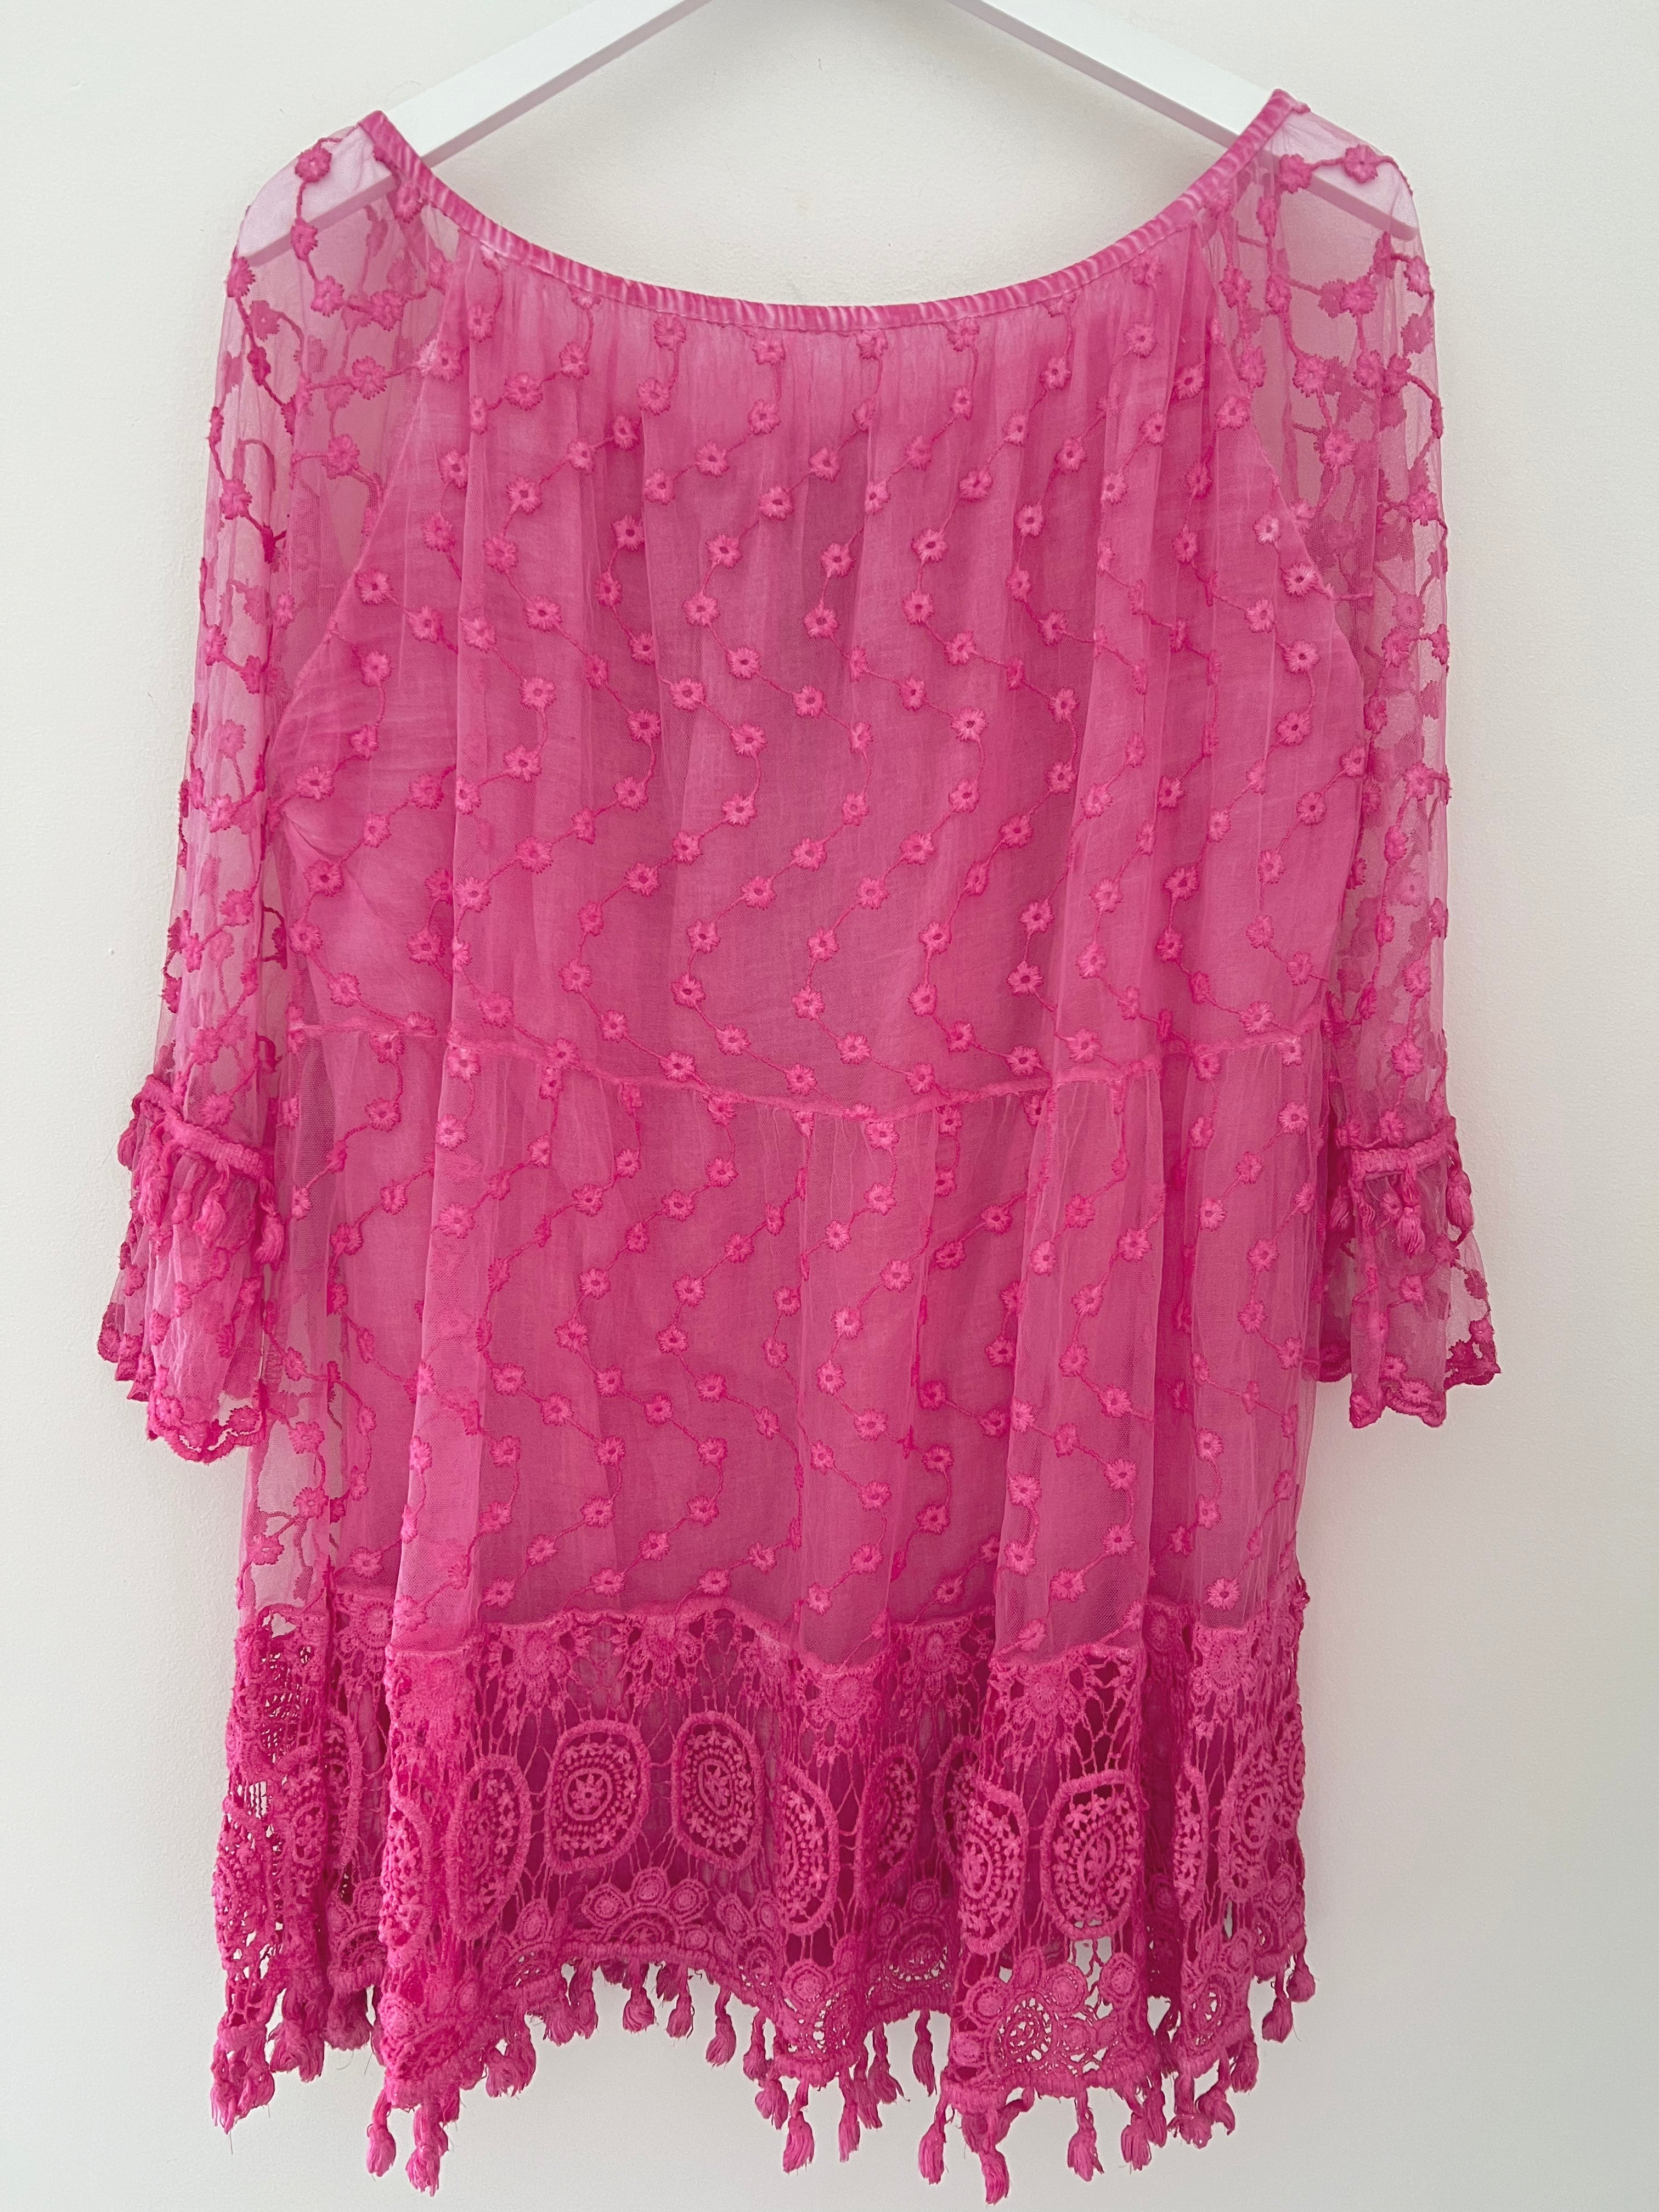 Lace Overlay Top in Pink